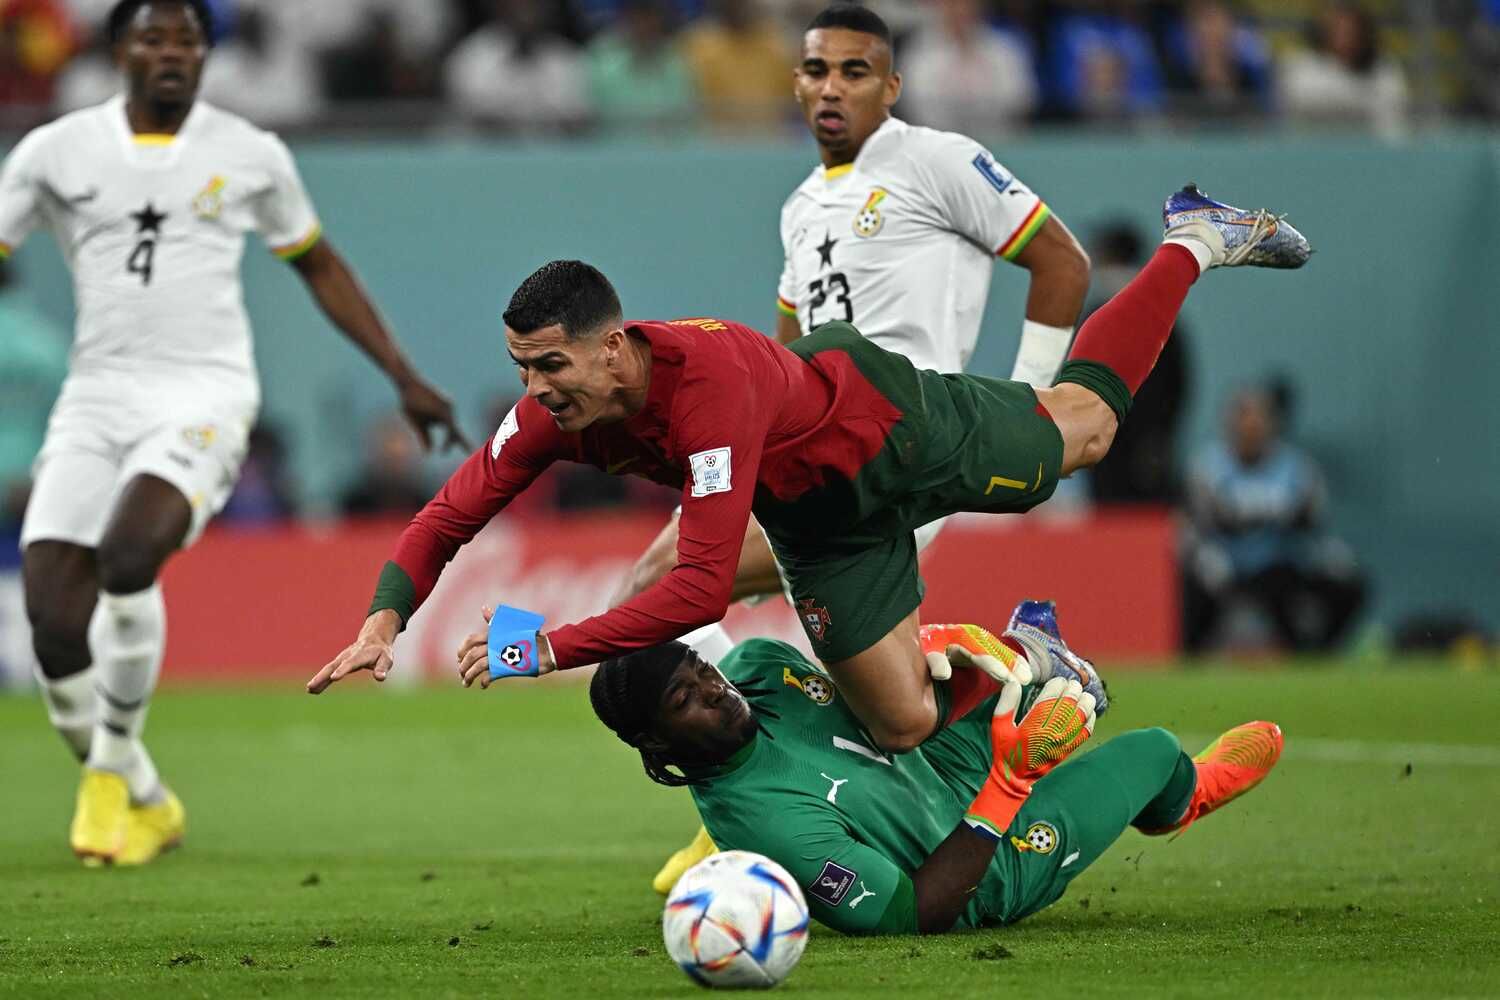 Ronaldo's goal helped Portugal defeat Ghana in the starting match of the 2022 World Cup